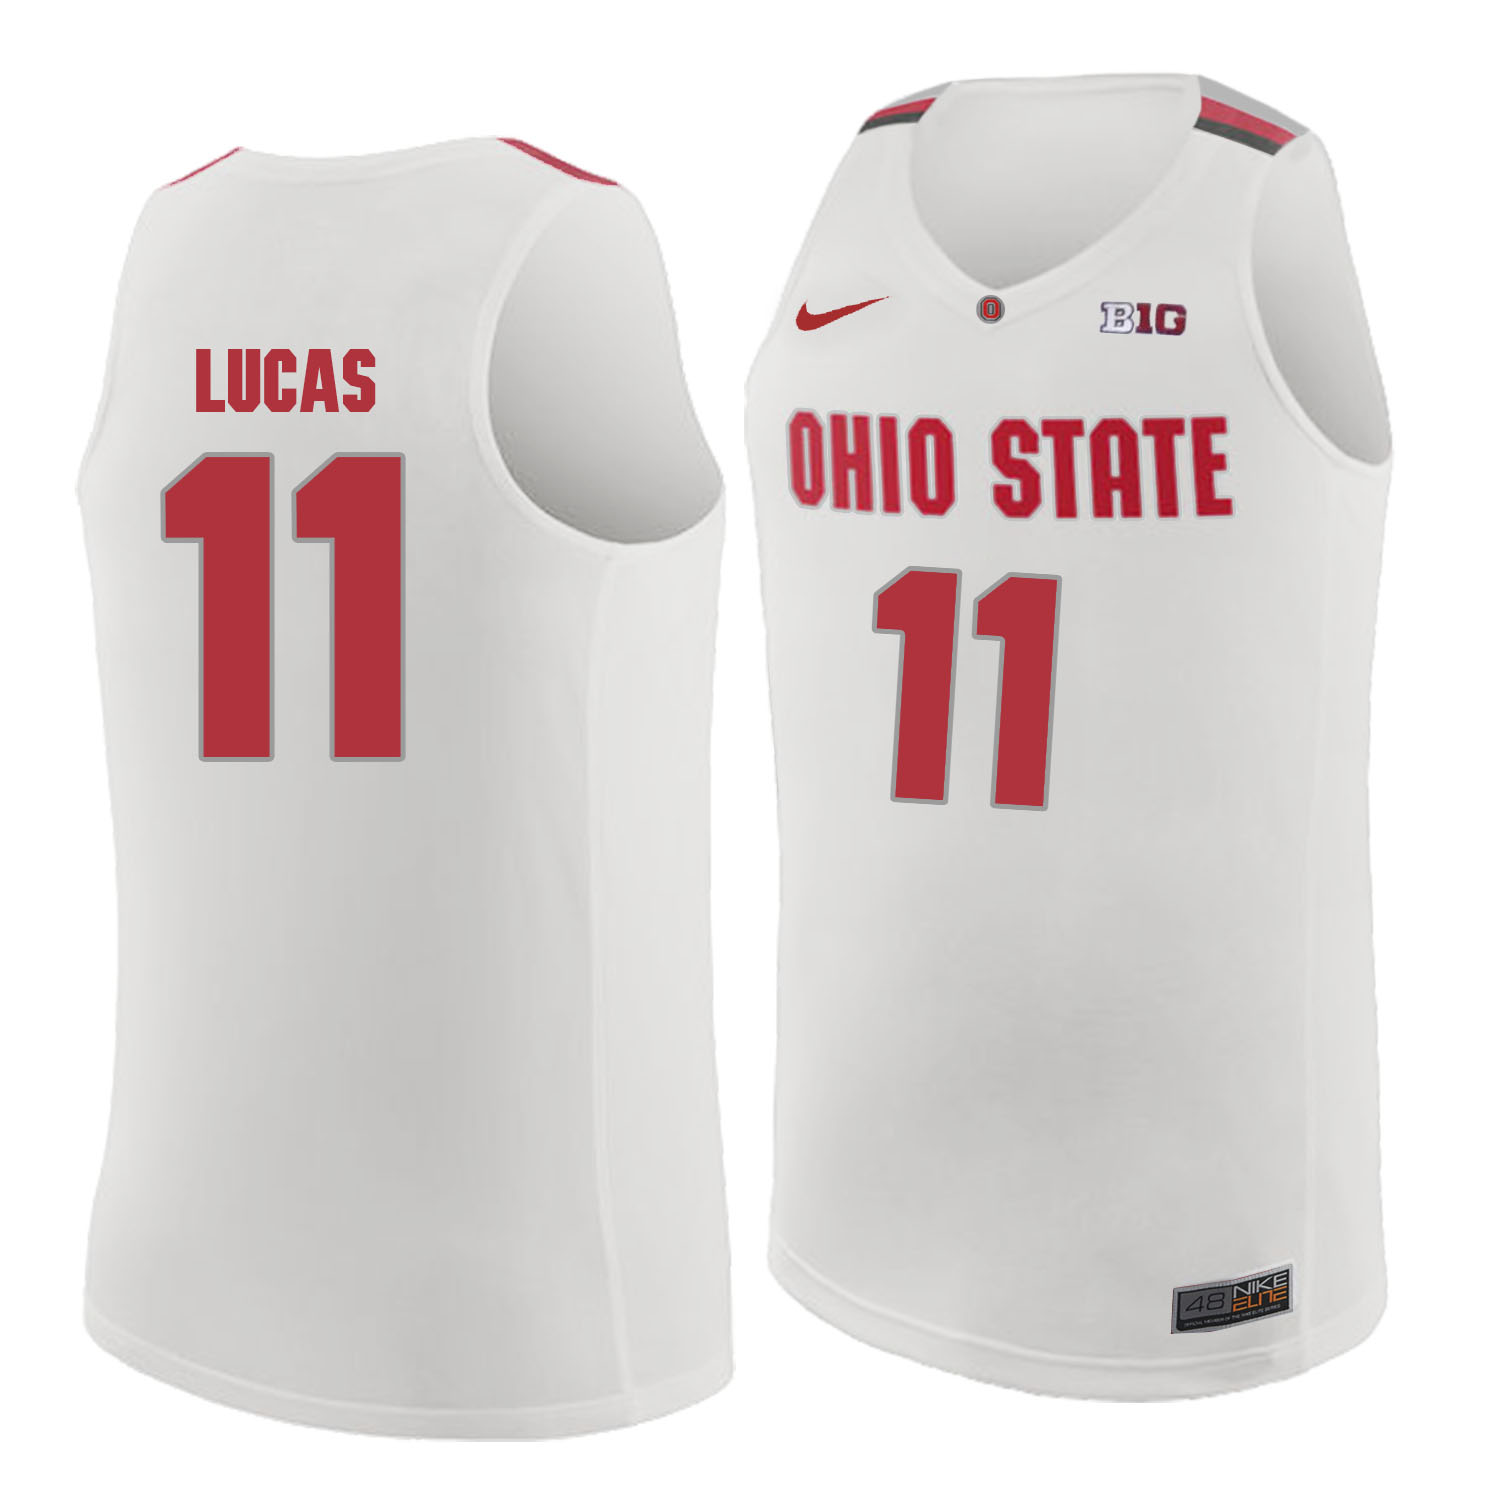 Ohio State Buckeyes 11 Jerry Lucas White College Basketball Jersey